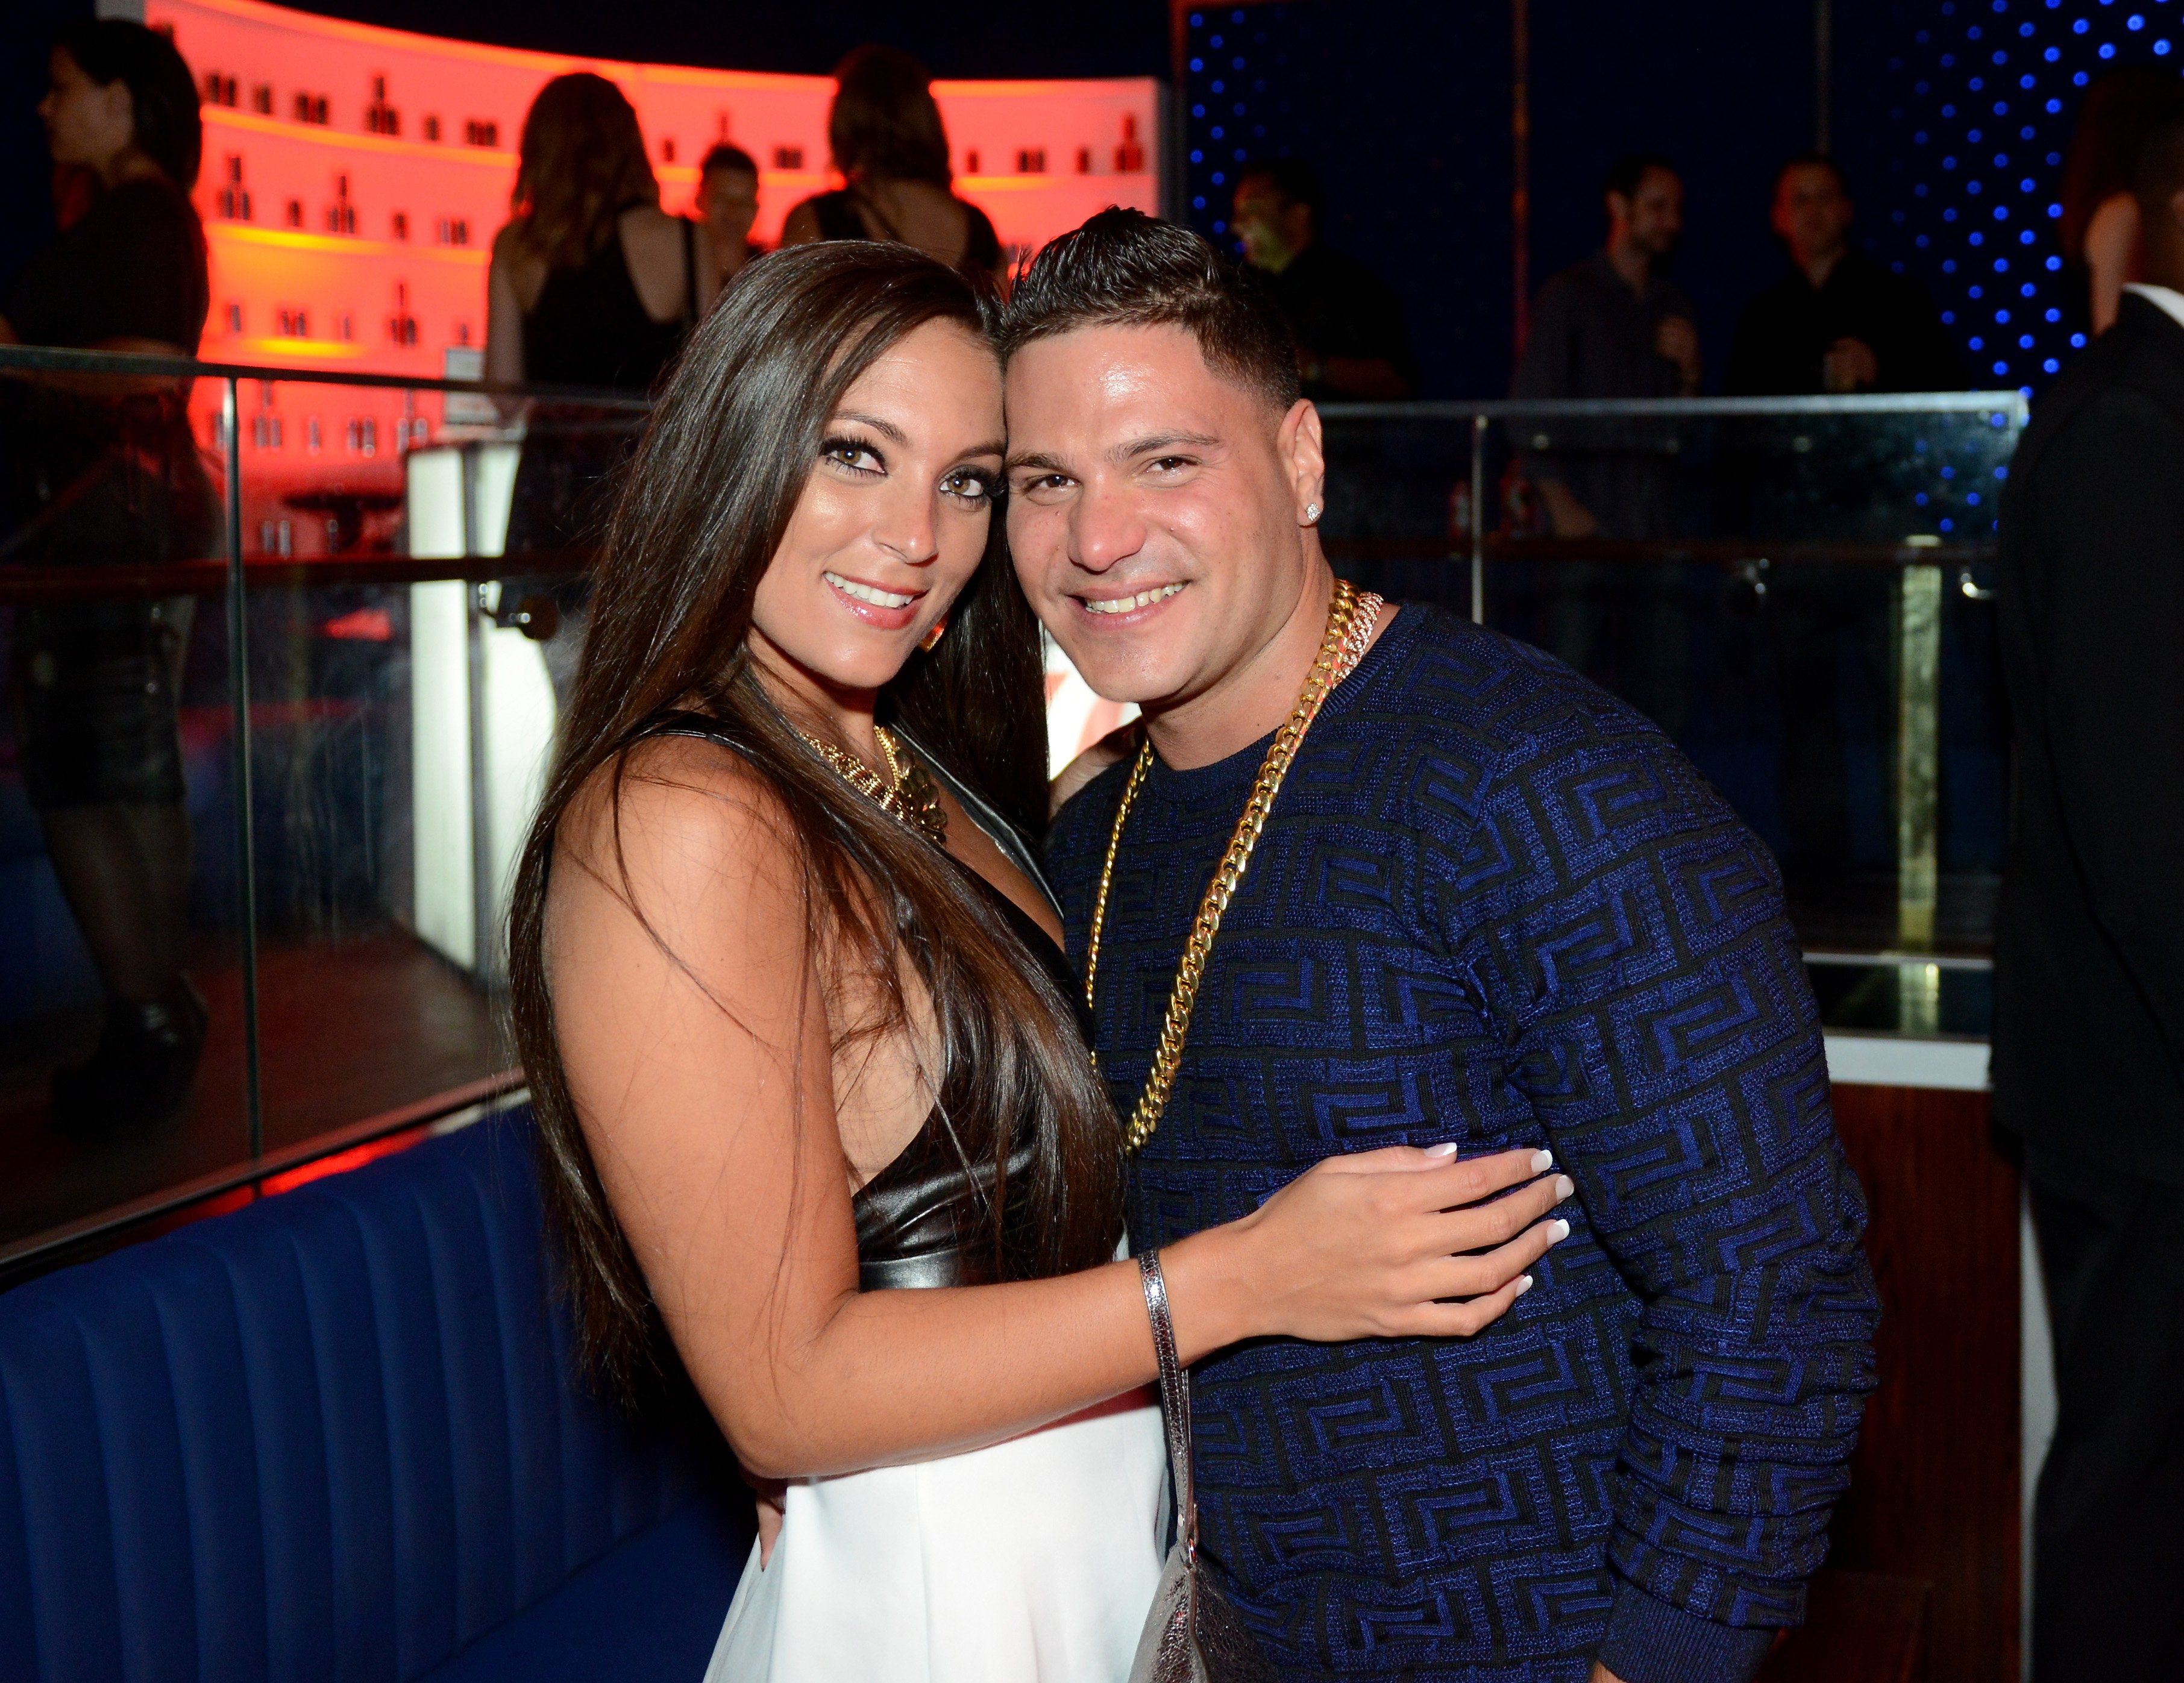 'Jersey Shore' stars Sammi 'Sweetheart' Giancola and Ronnie Ortiz-Magro posing together